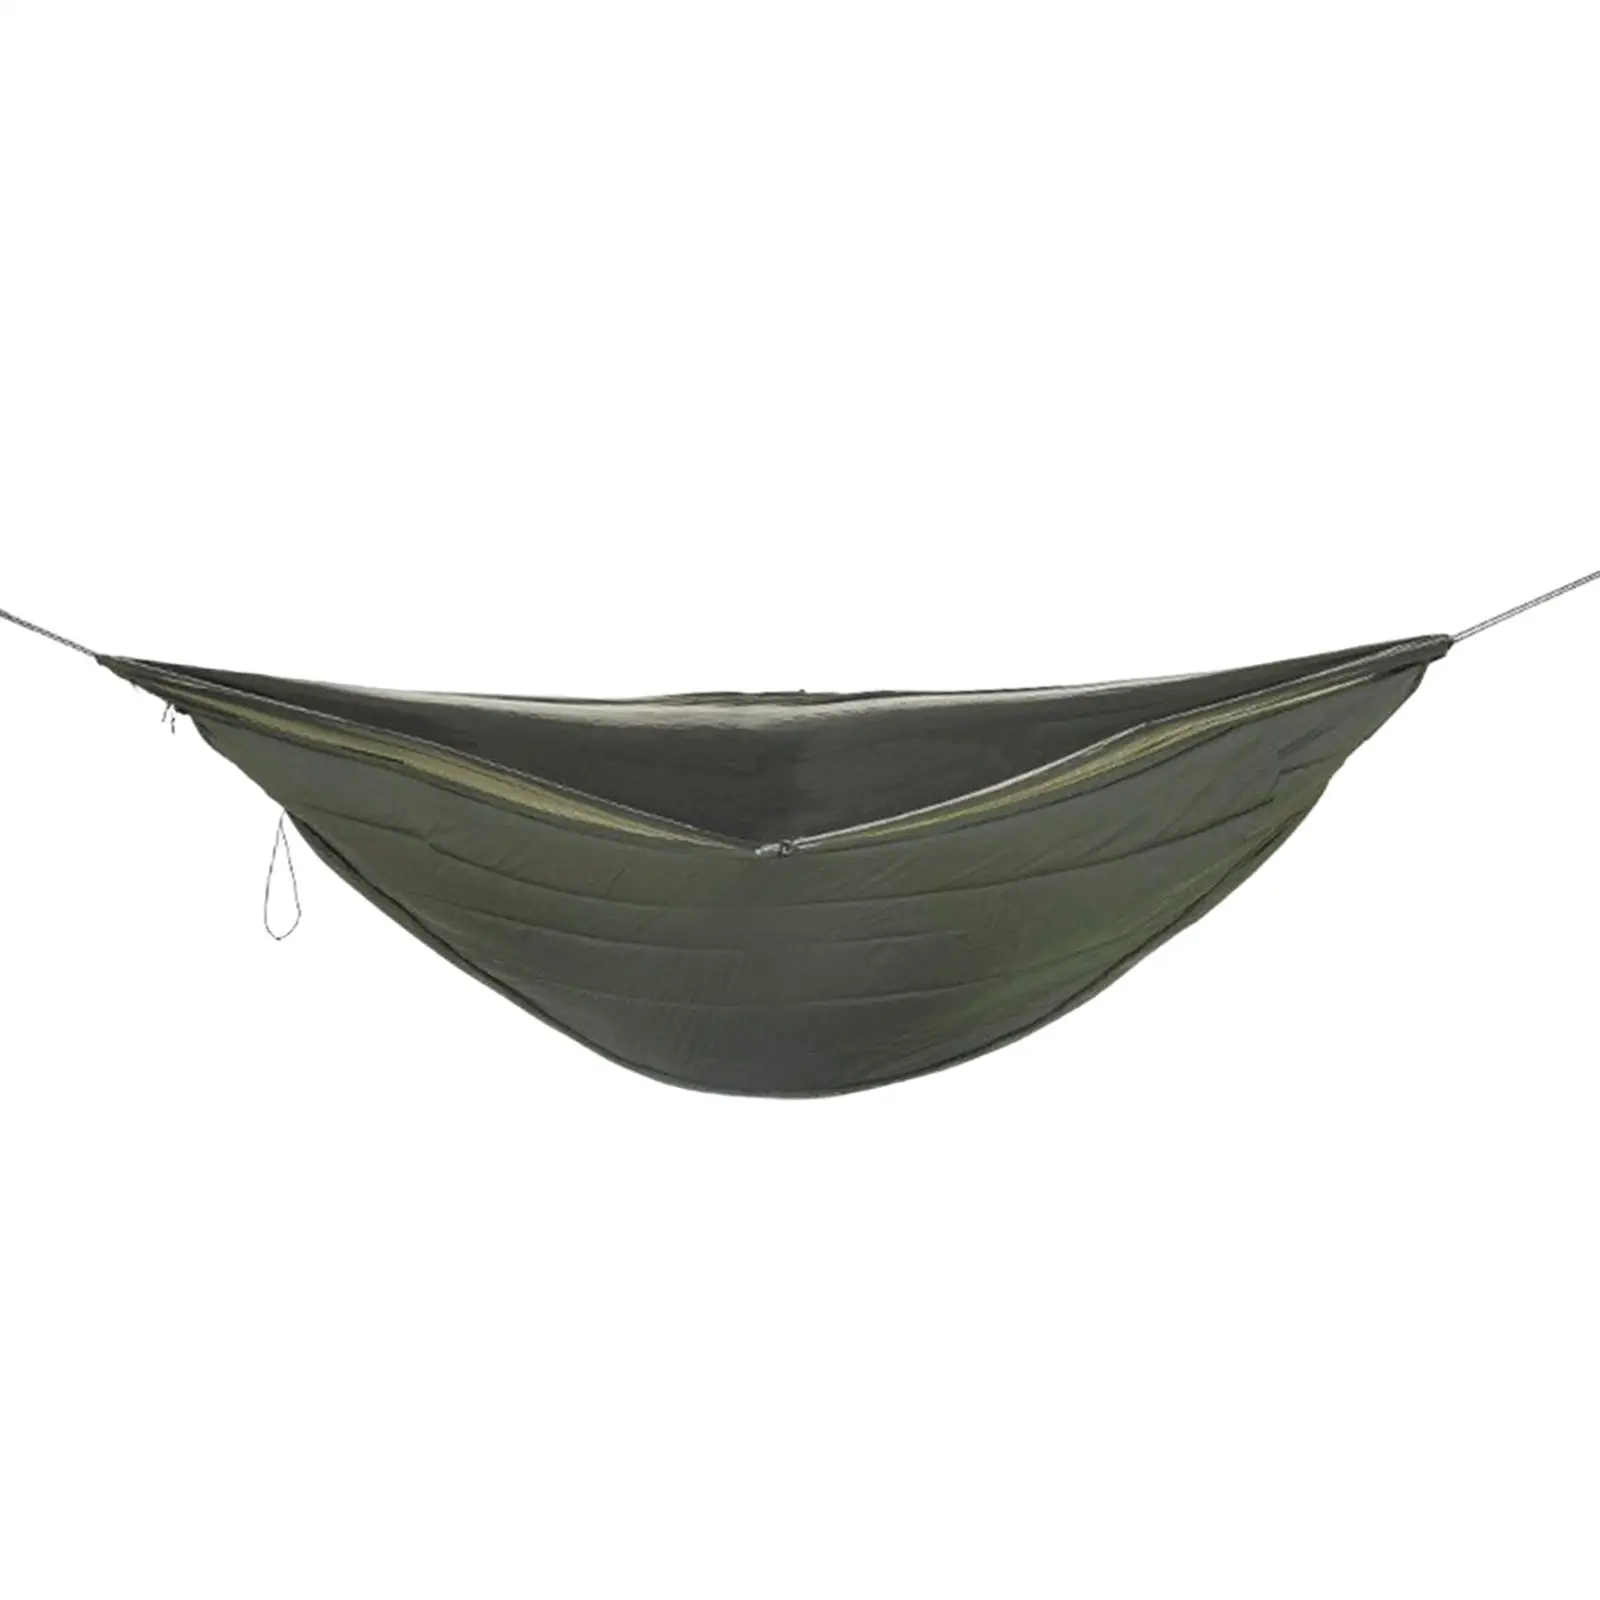 Winter Outdoor Hammock Underquilt Ultralight Warm Insulated for Backpacking